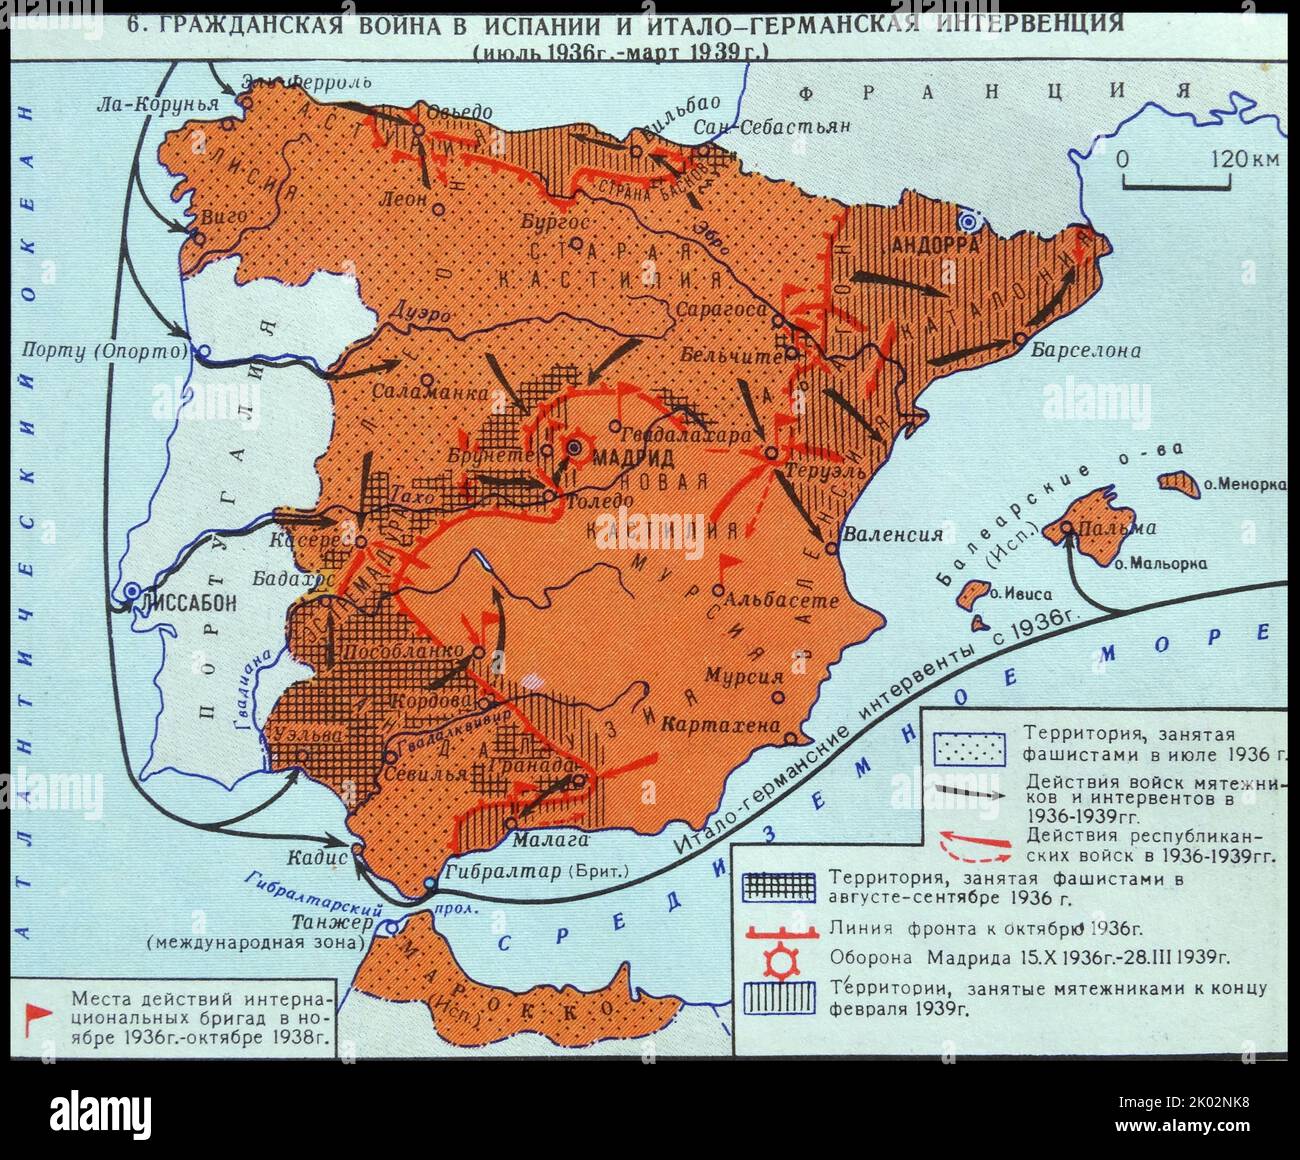 Civil War in Spain and the Italian-German intervention. (July 1936 - March of 1939). Stock Photo